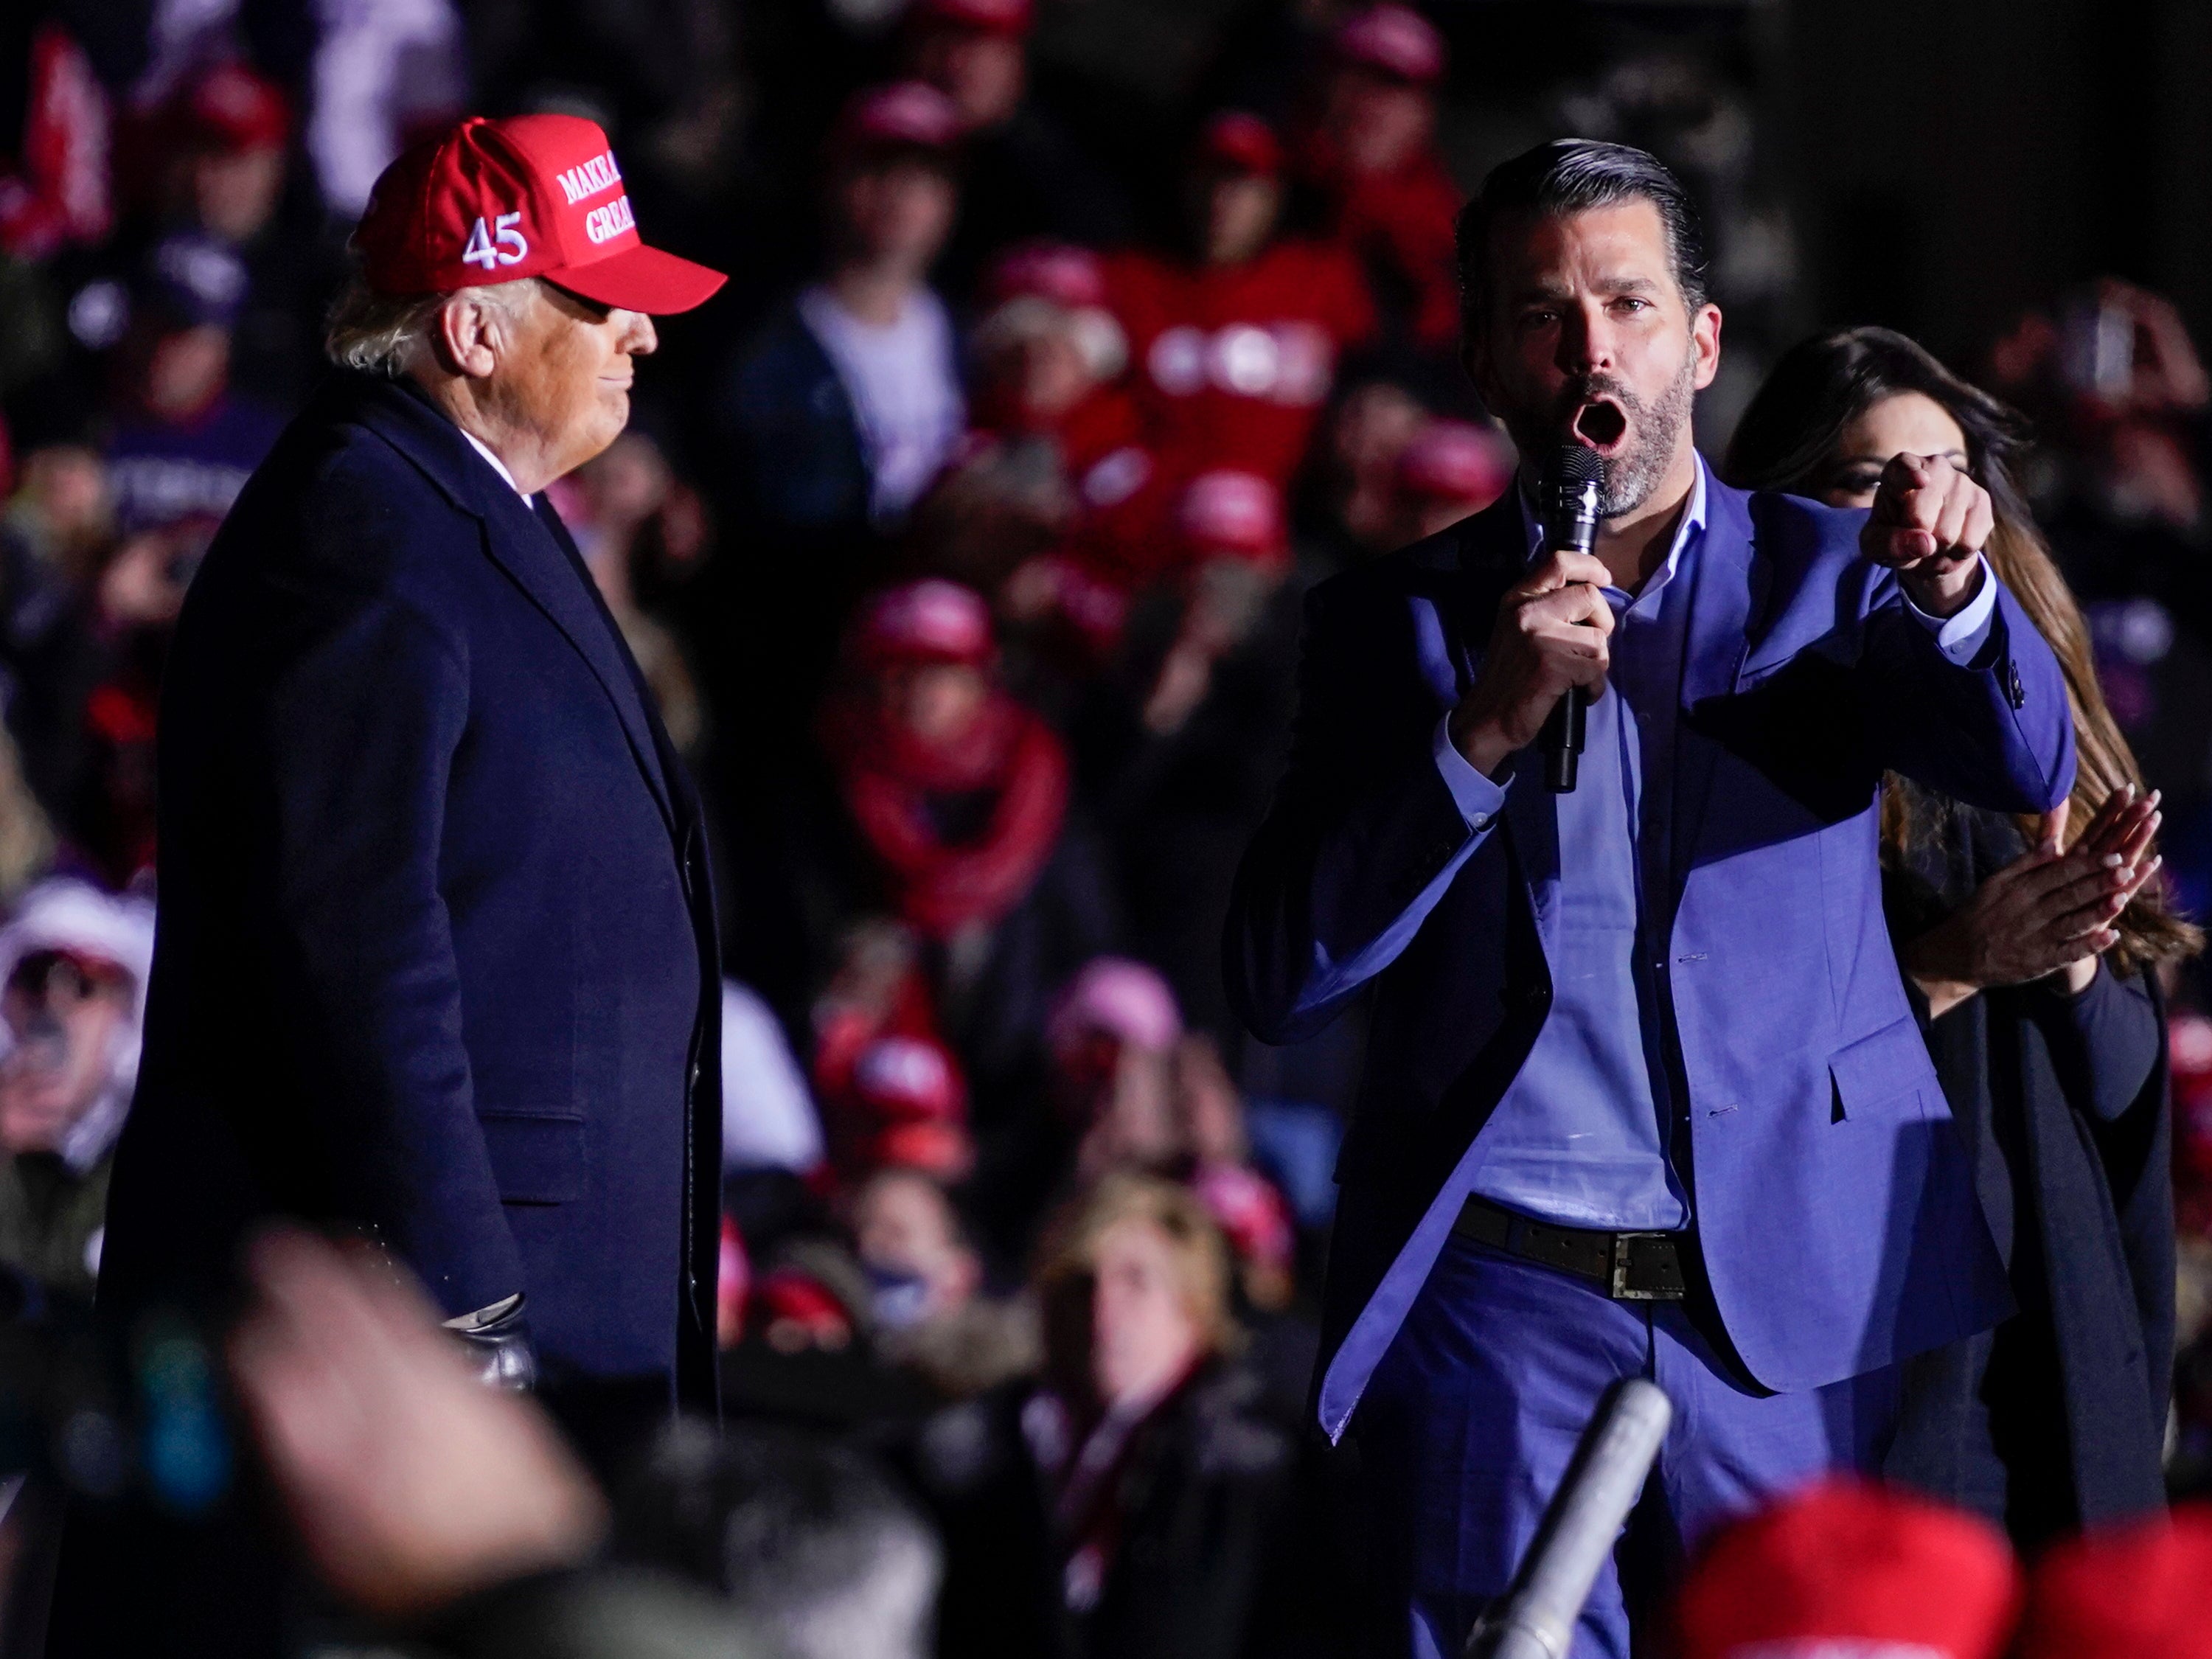 <p>The US president listens as Donald Trump Jr speaks during a campaign rally at Kenosha regional airport</p>